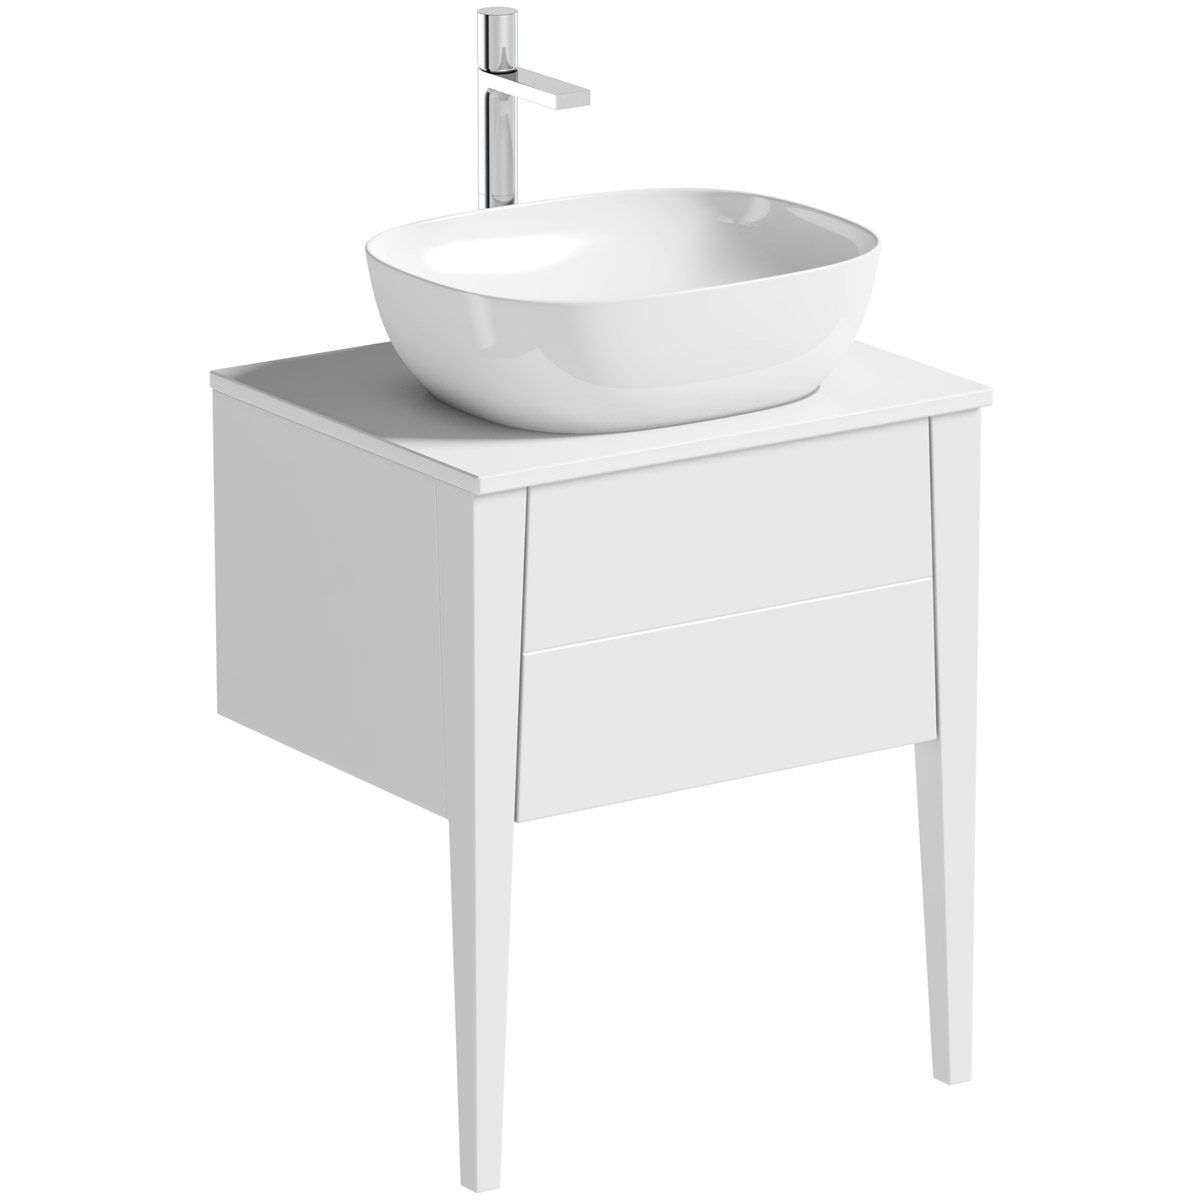 Mode Hale white gloss wall hung vanity unit with ceramic countertop and basin 600mm